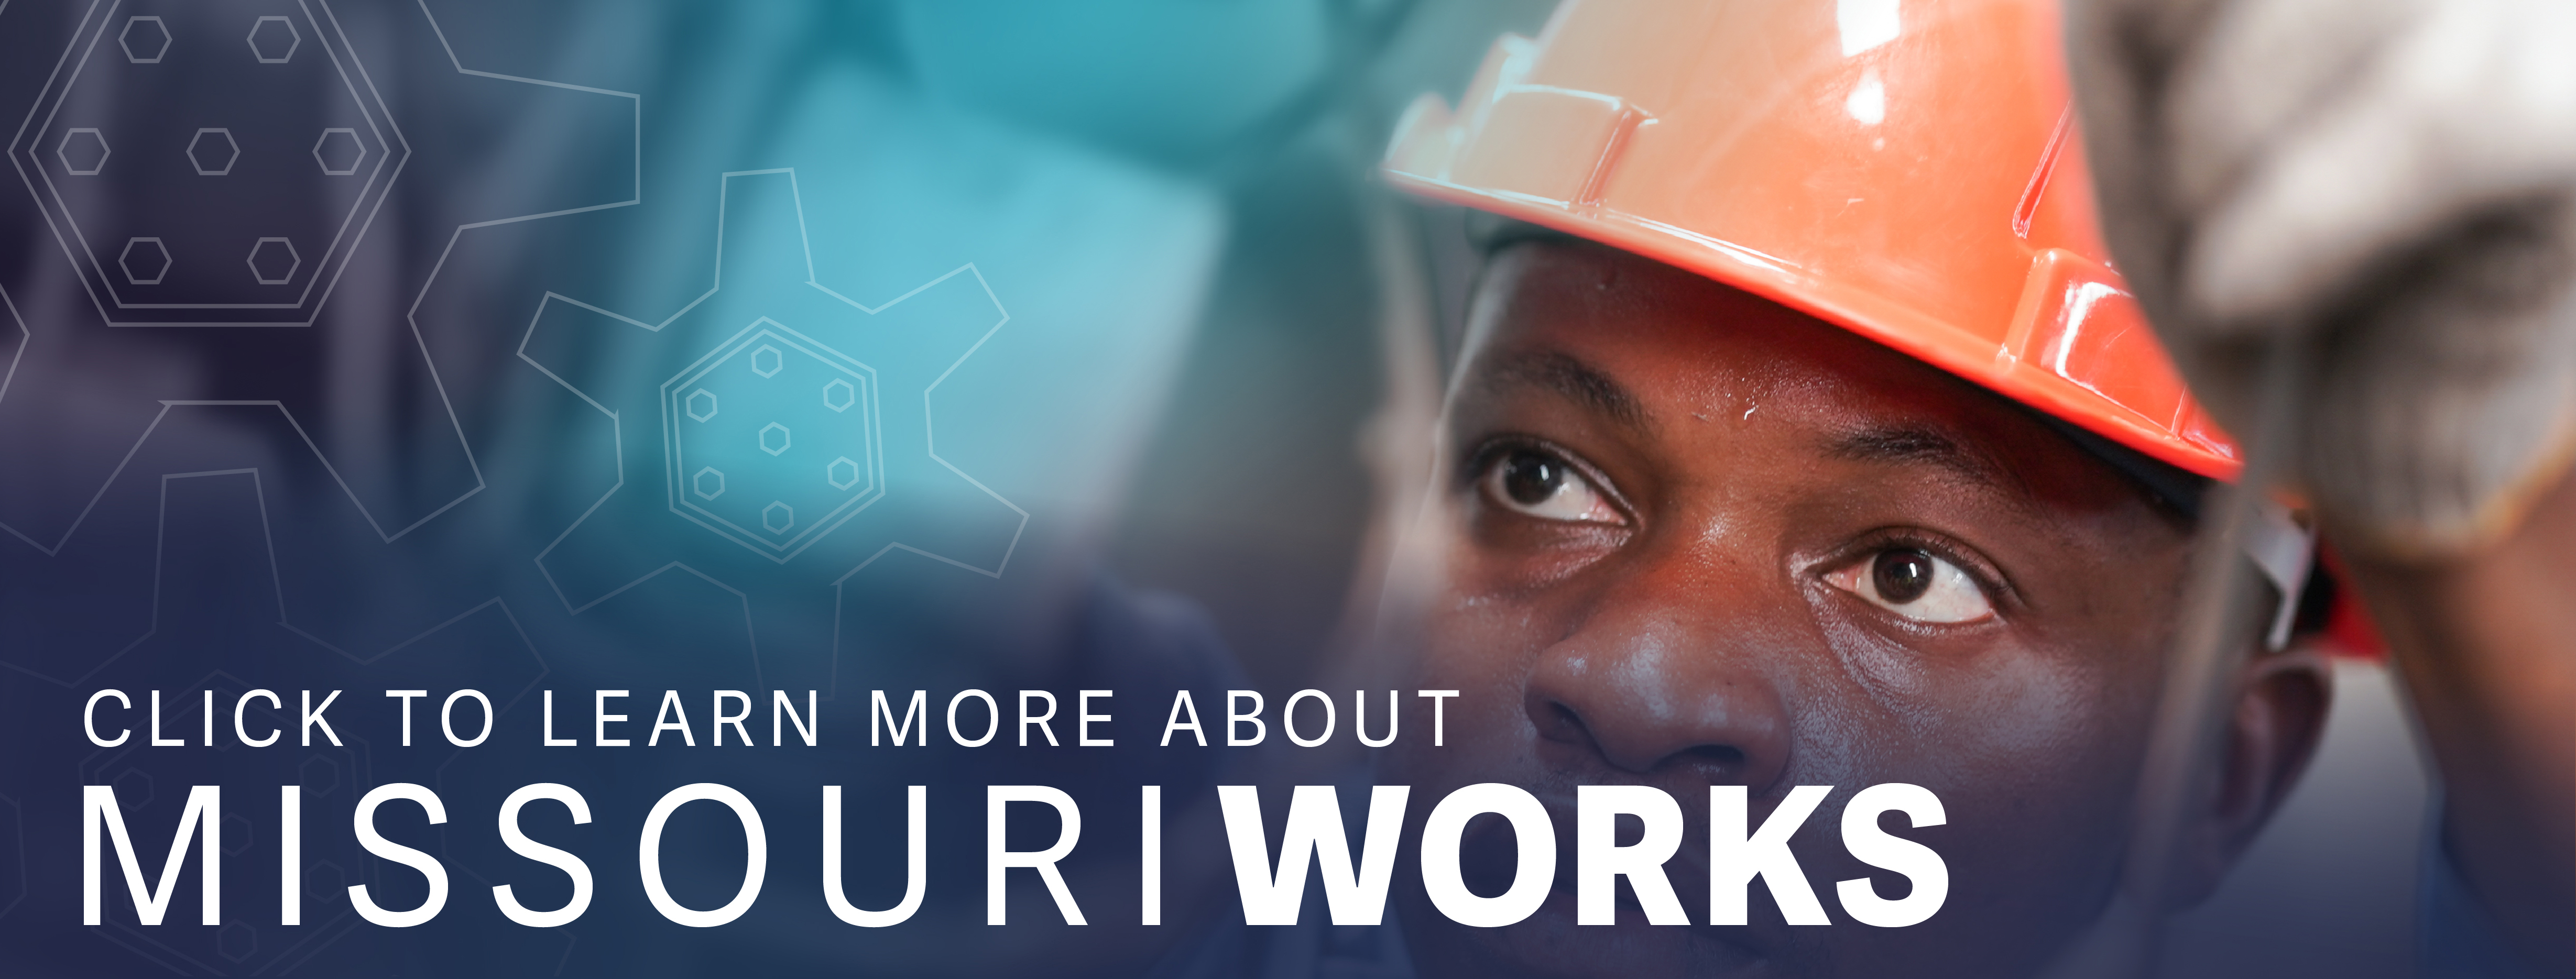 Click to learn more about Missouri Works